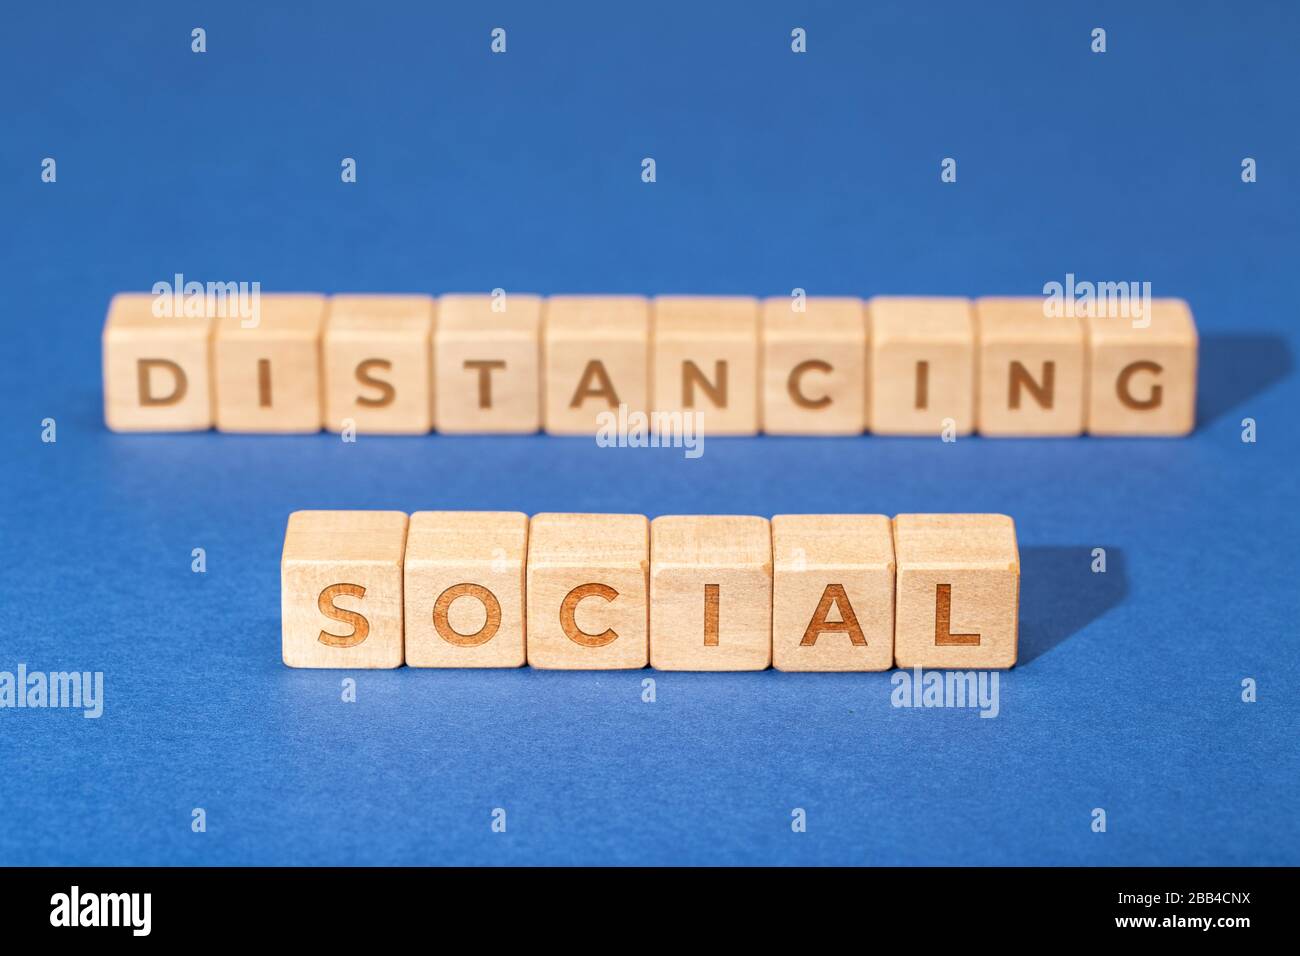 Social distancing concept. Wooden dices isolated on blue background. Coronavirus COVID-19 outbreak advice Stock Photo